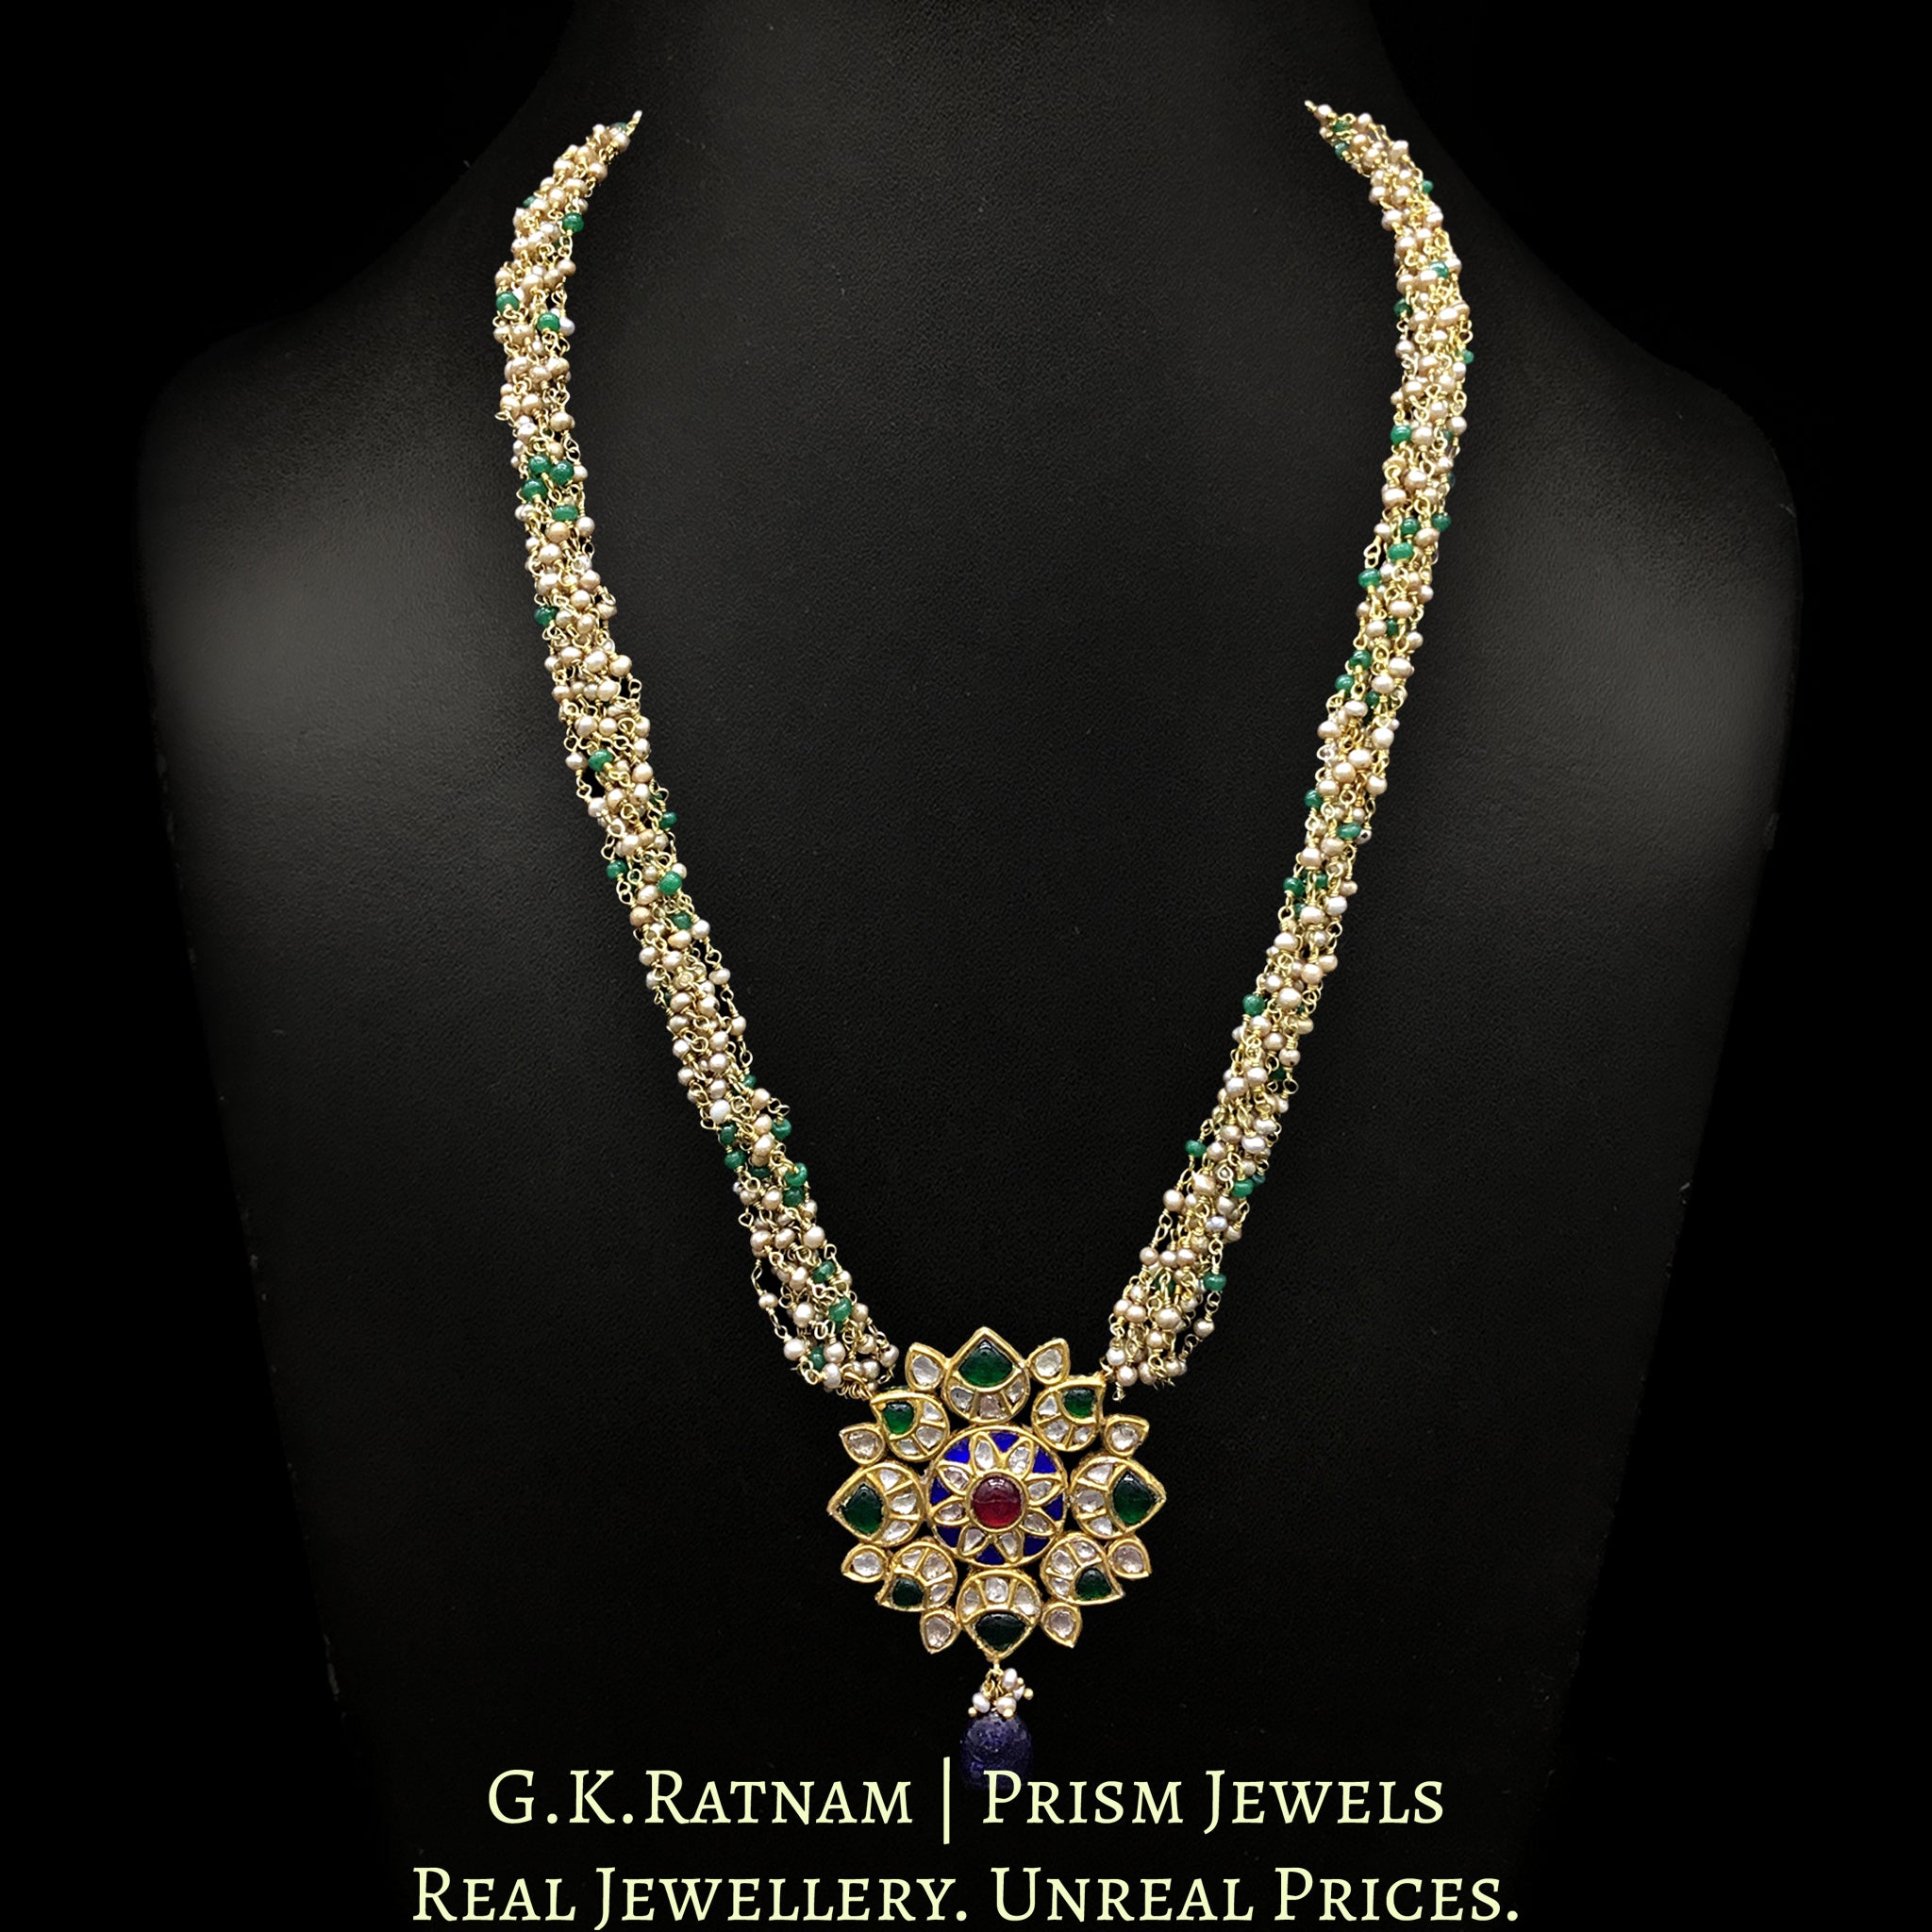 23k Gold and Diamond Polki star-shaped Pendant Set with antiqued hyderabadi pearl chains and a hint of green